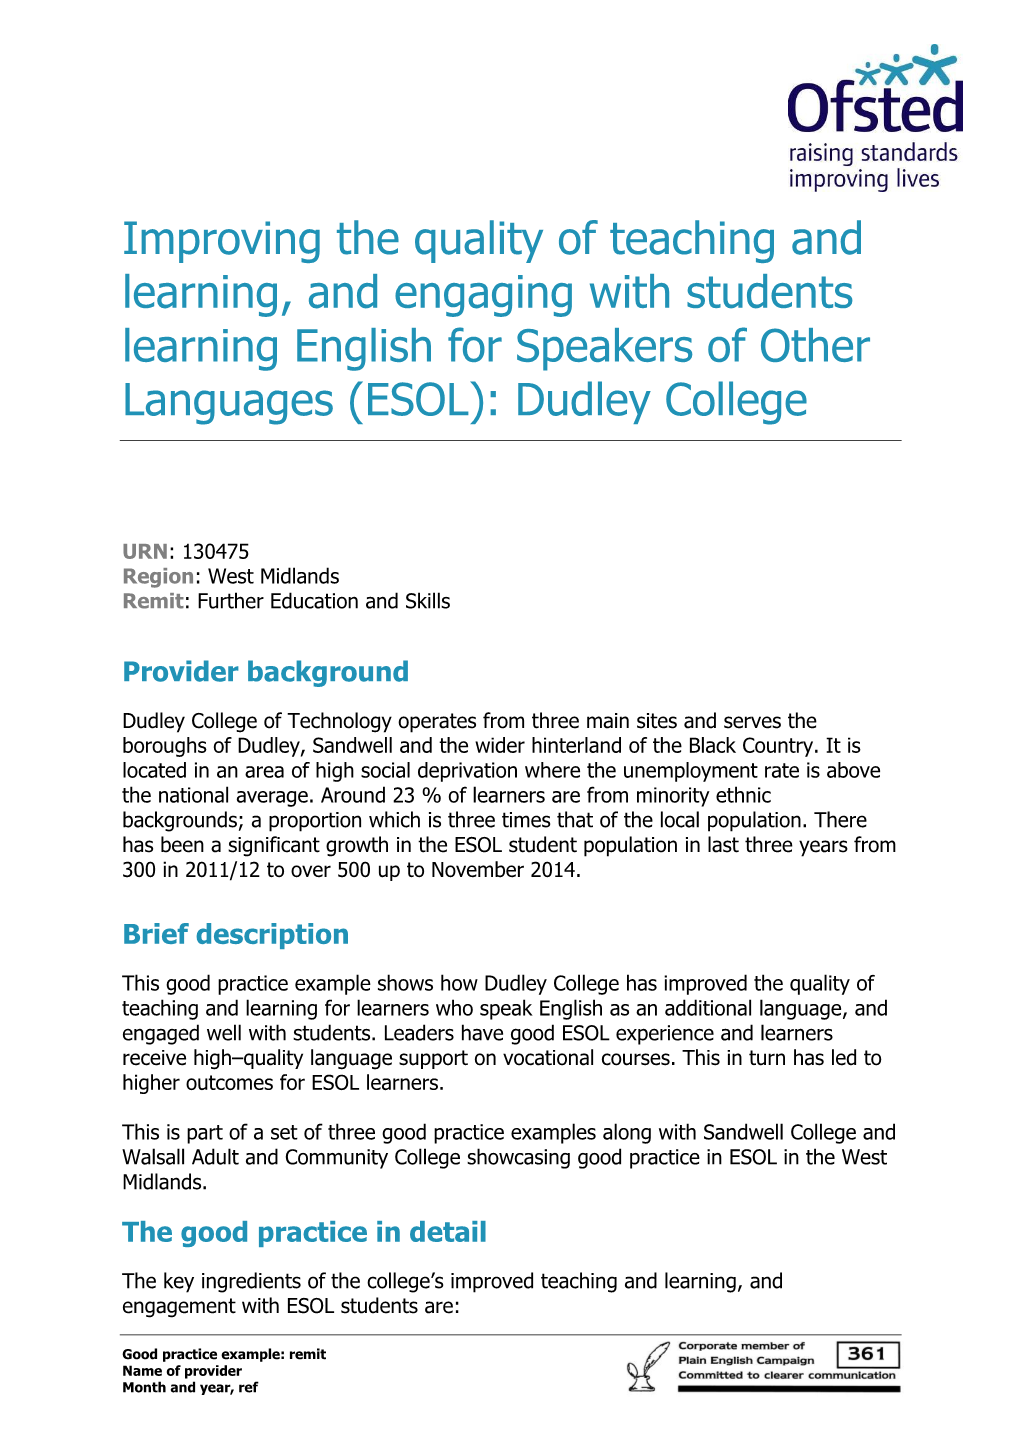 Ofsted – English for Speakers of Other Languages